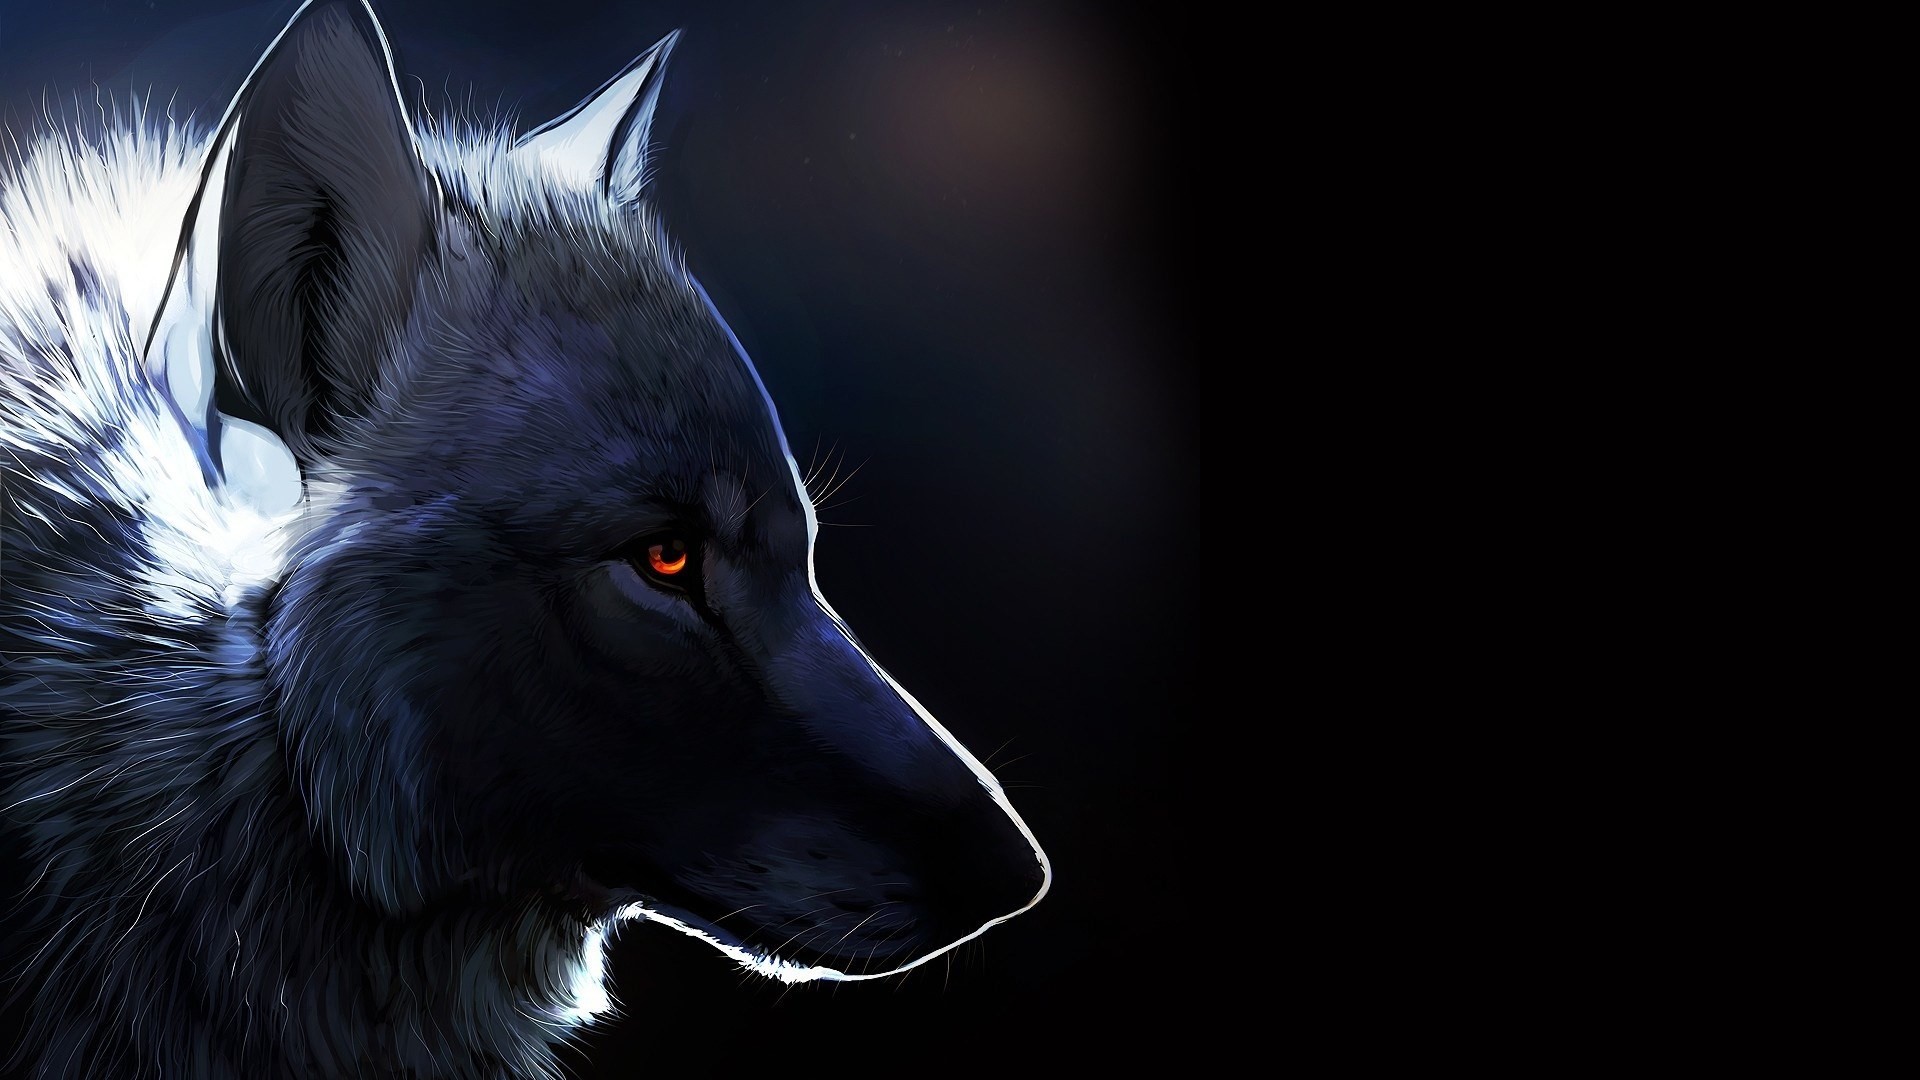 1920x1080 wolf art images background, 311 kB - Corvin Cook